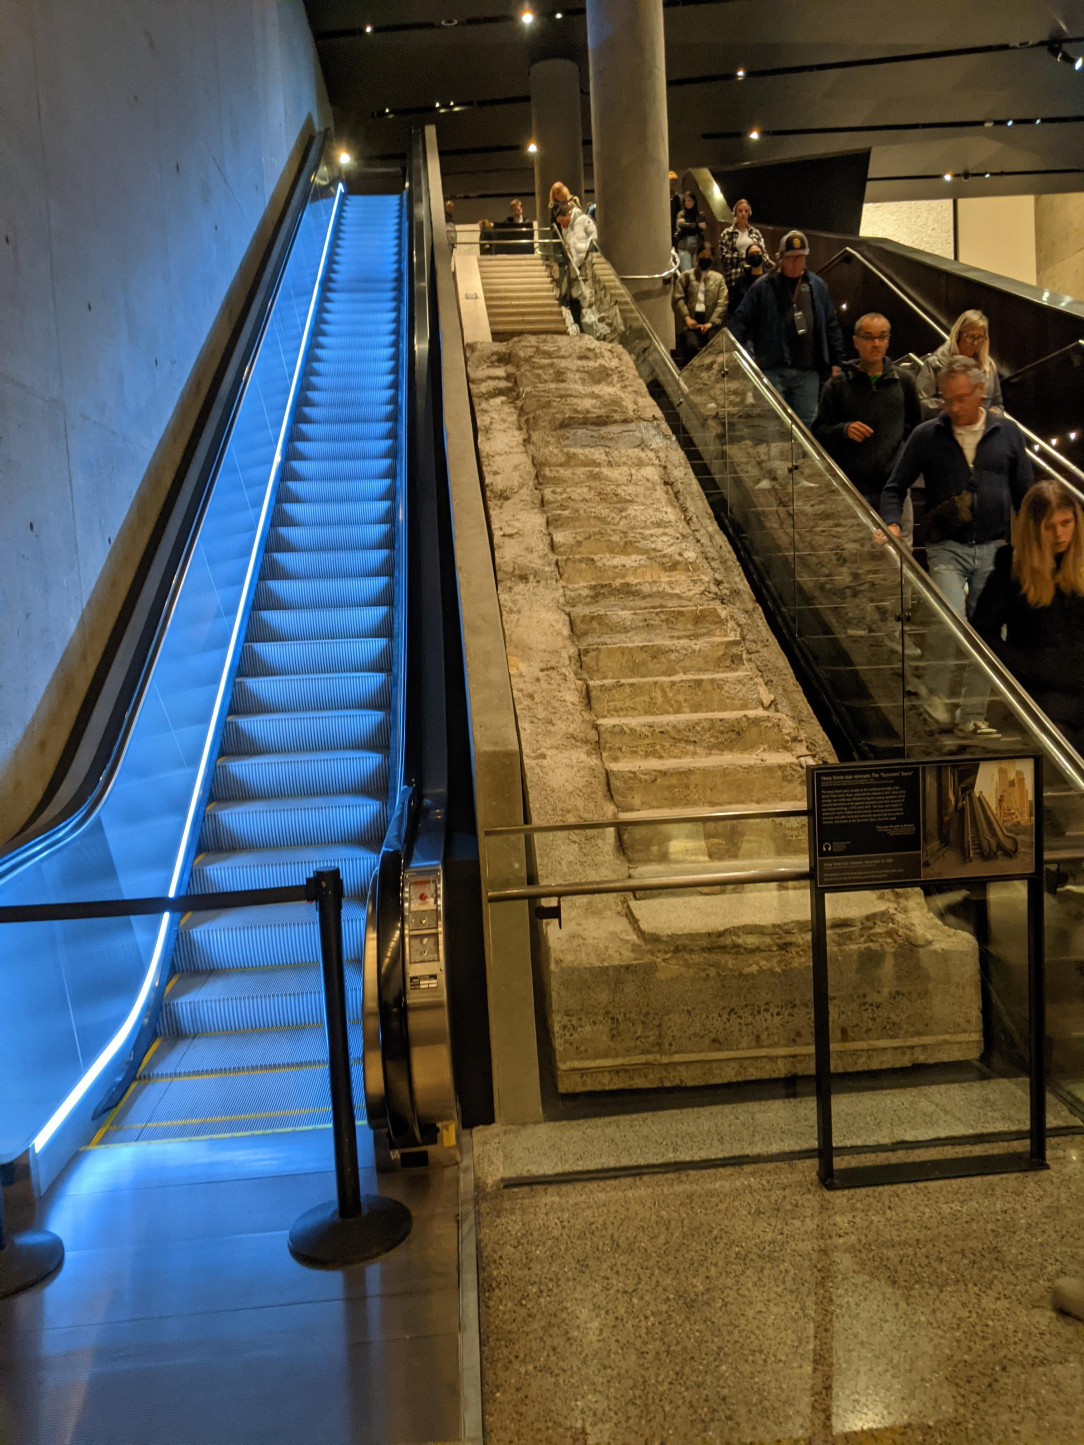 &quot;The survivor stairs. &quot; These stairs led underground from the world trade center. The people who made it down these stairs survived that day